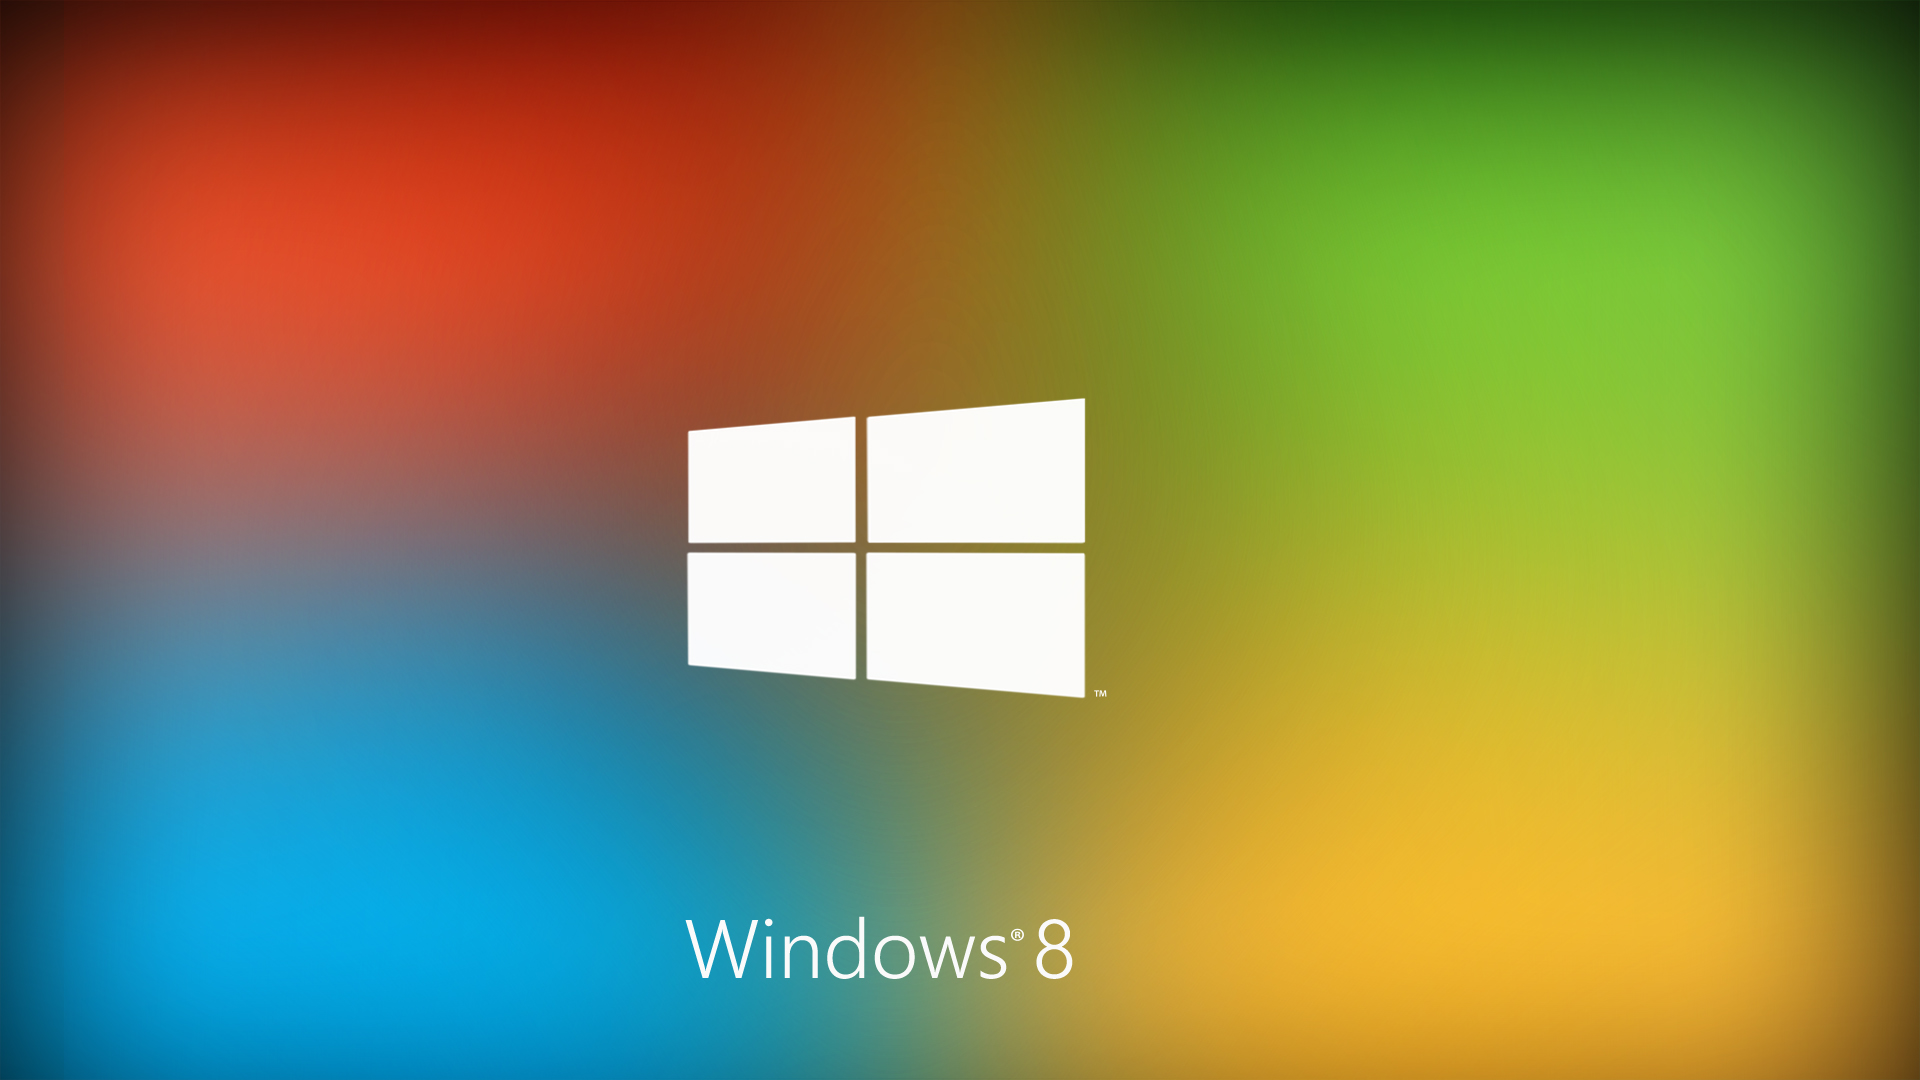 Free download Windows 8 Wallpaper Pack by Brebenel Silviu on [1920x1080